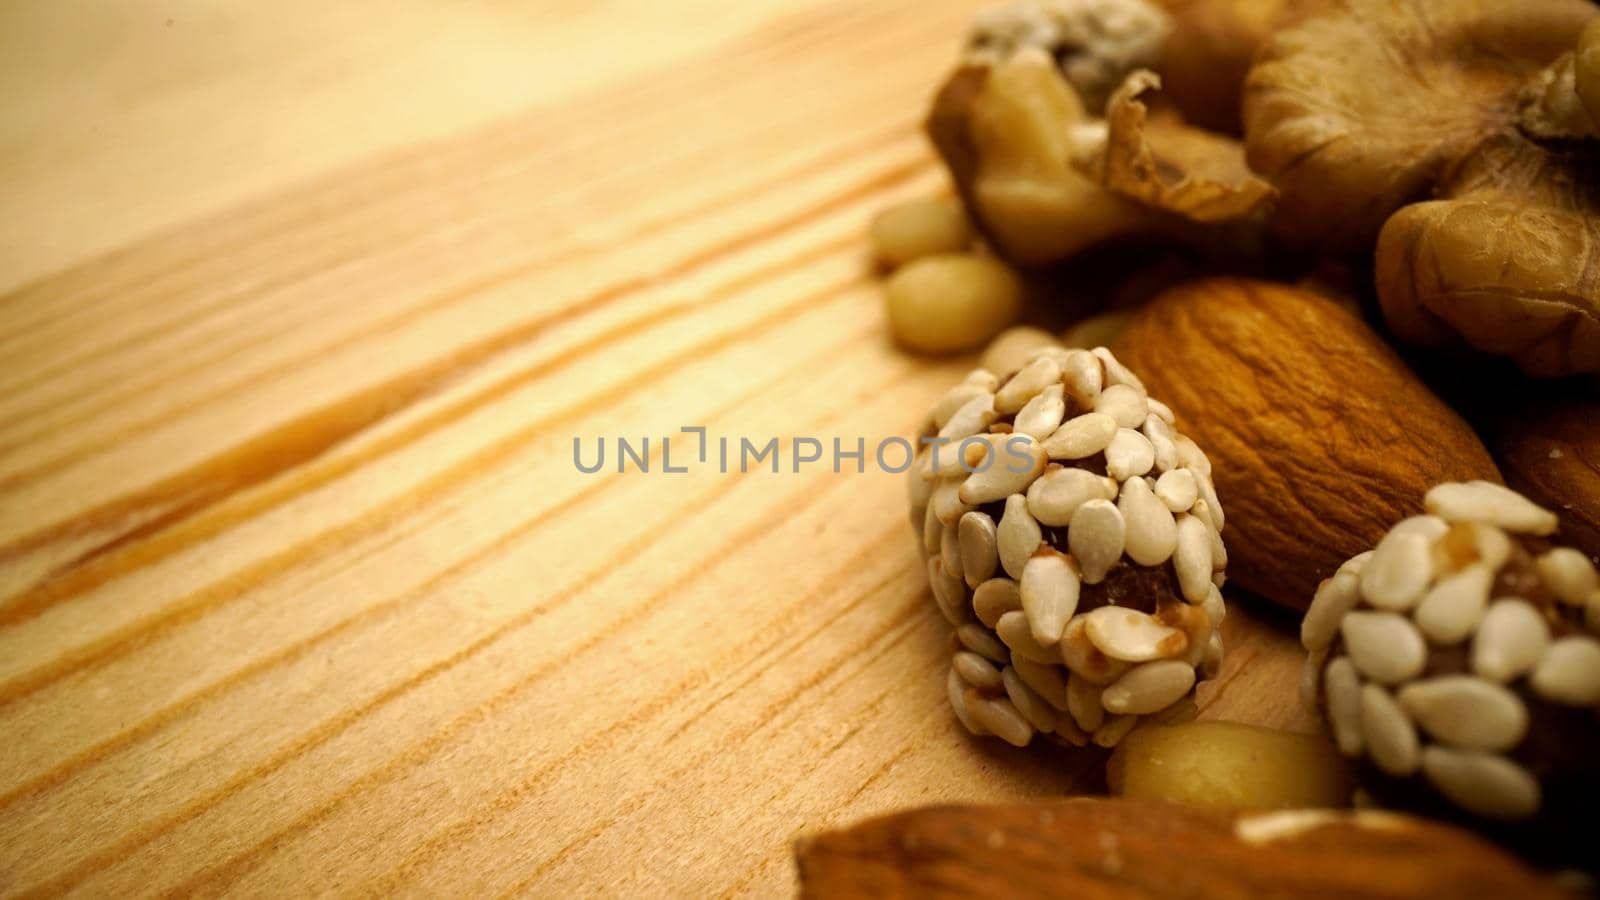 Nuts on a wooden background. close-up and selective focus. Nuts on a table close-up. by Rusrussid